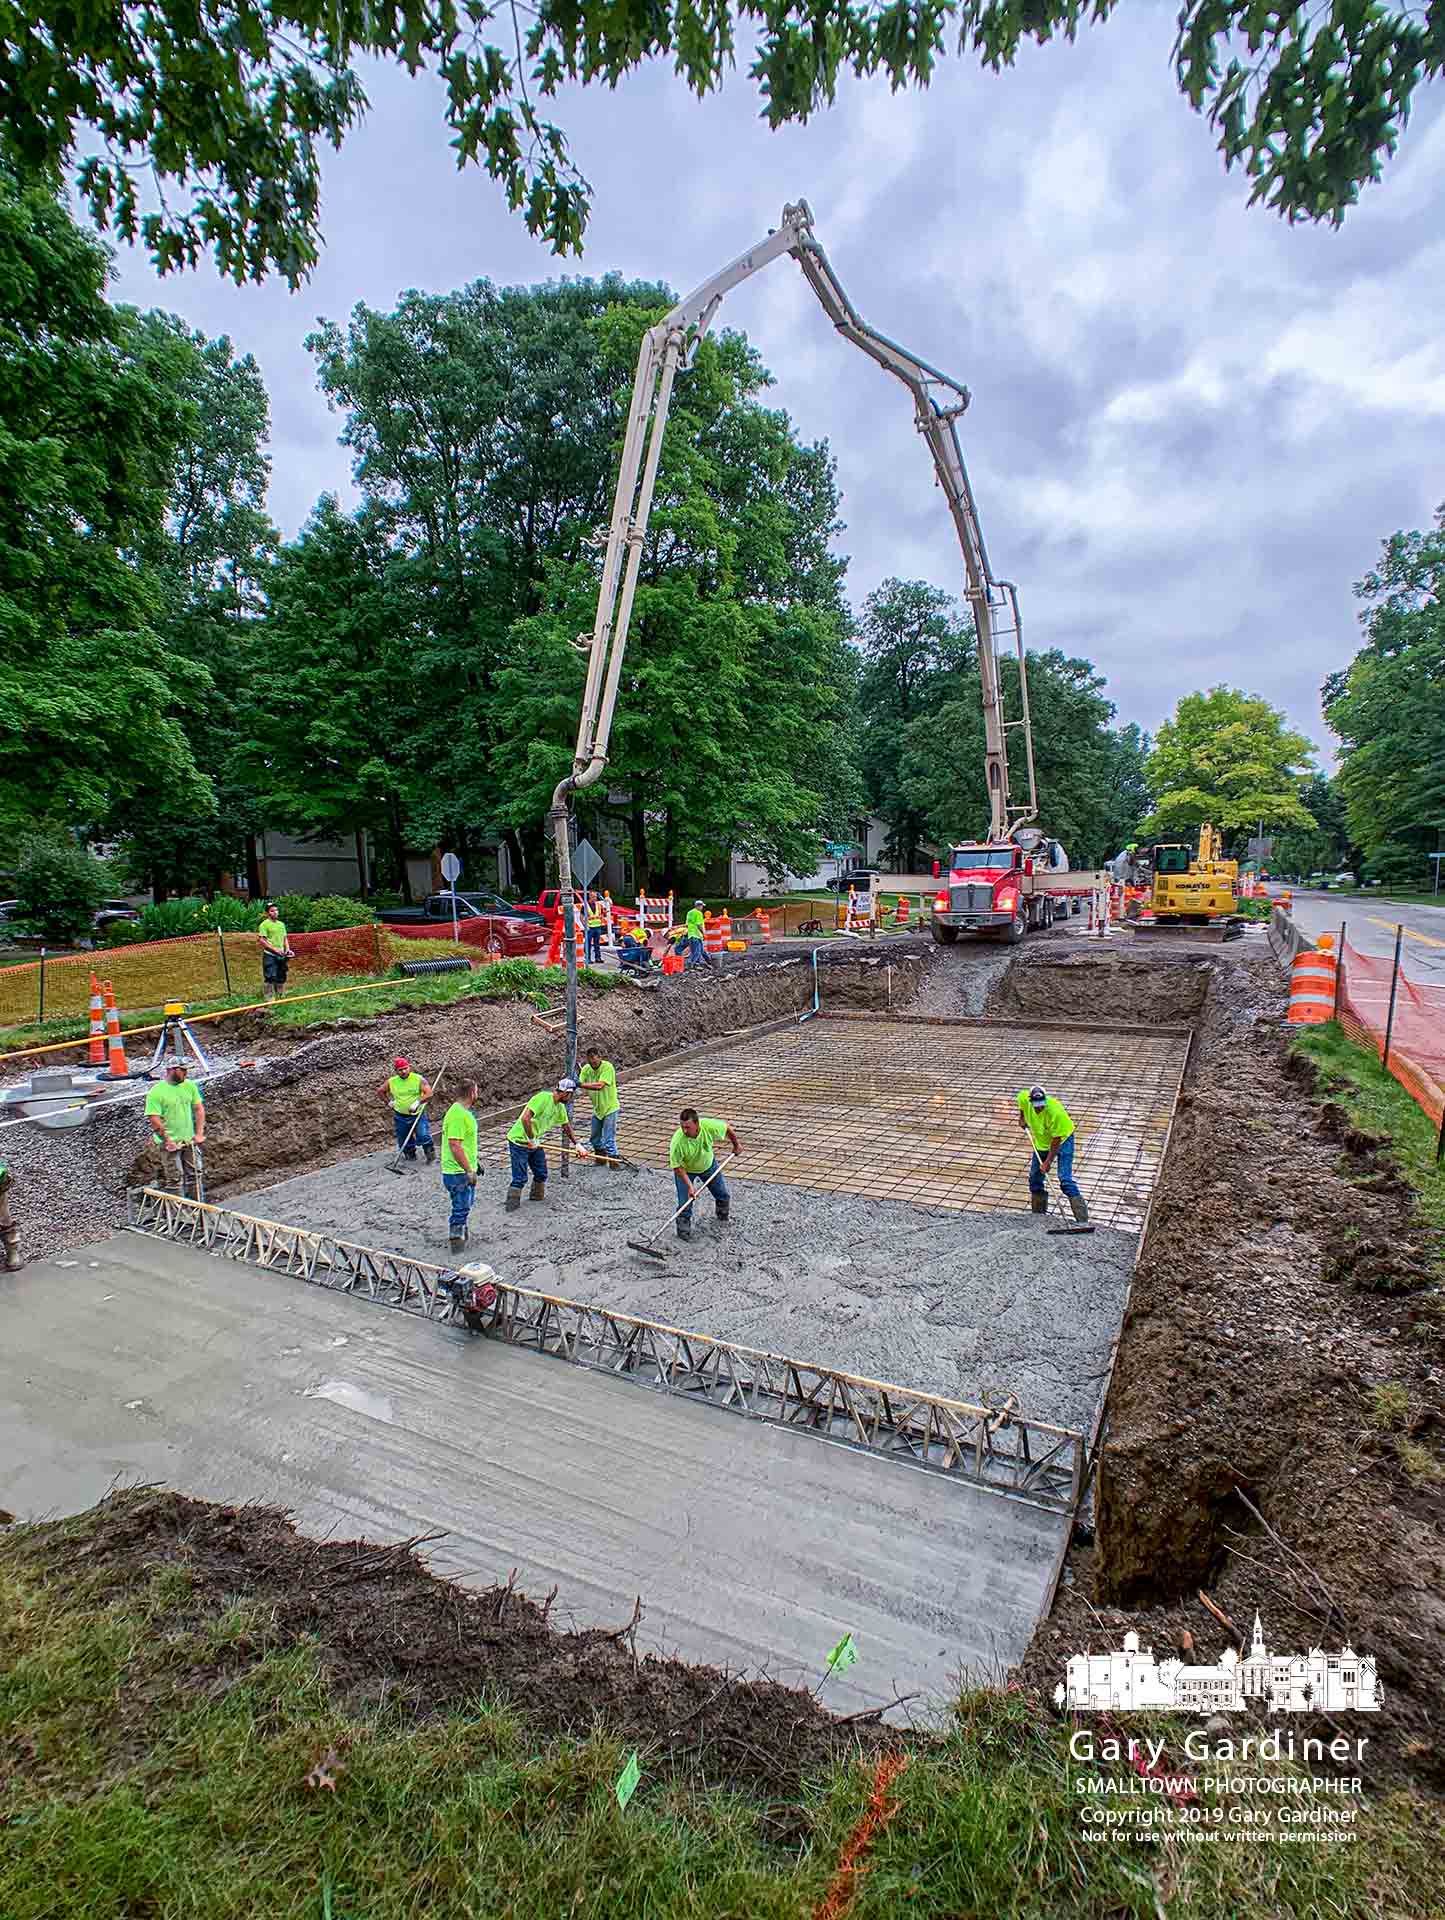 Construction workers pump concrete for the second of four underground holding tanks on Spring Road that are designed to help manage heavy stormwater runoff. My Final Photo for June 18, 2019.